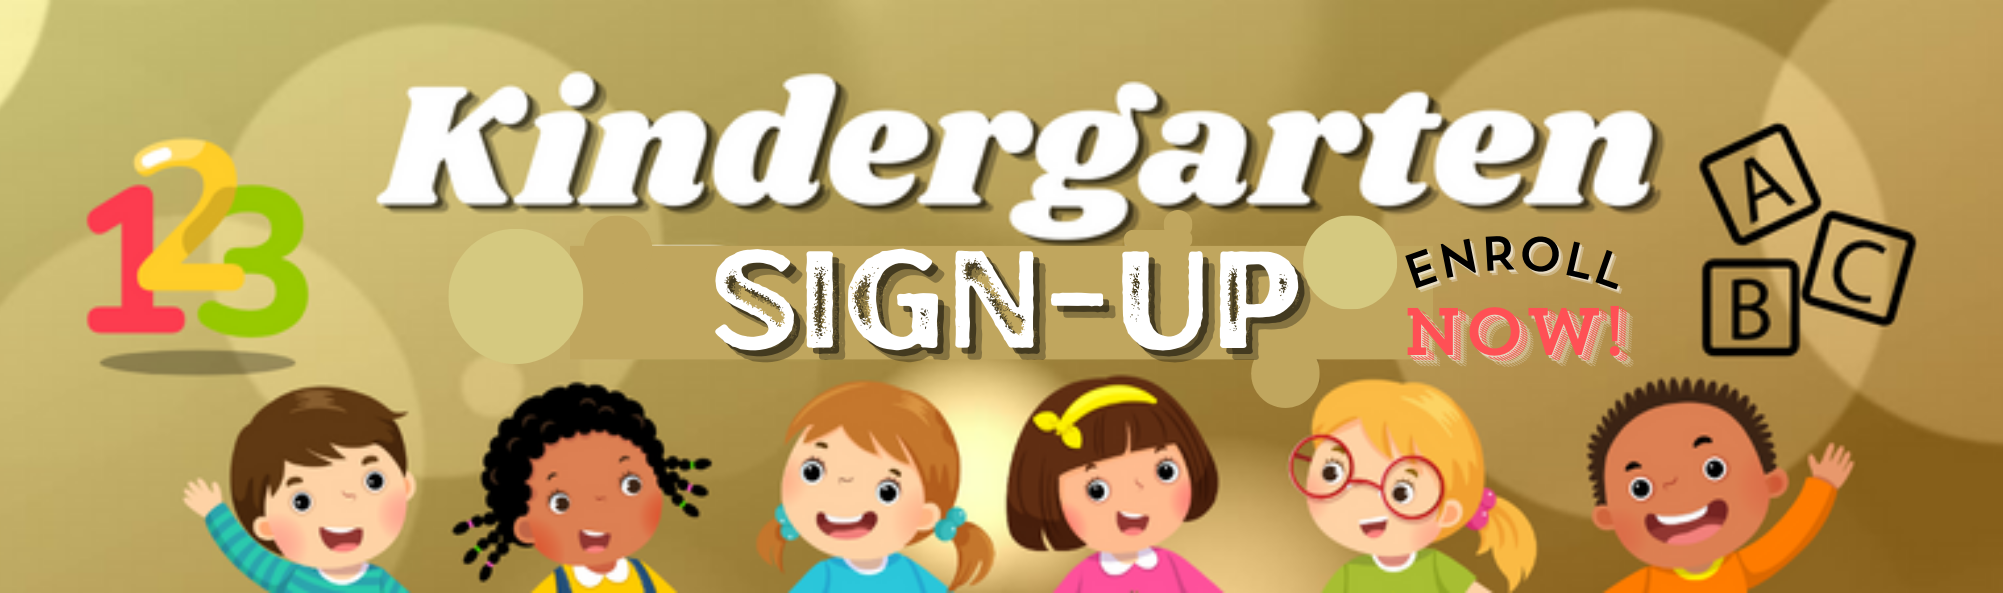 Kindergarten Sign-up 123 Enroll Now!  ABC   Students